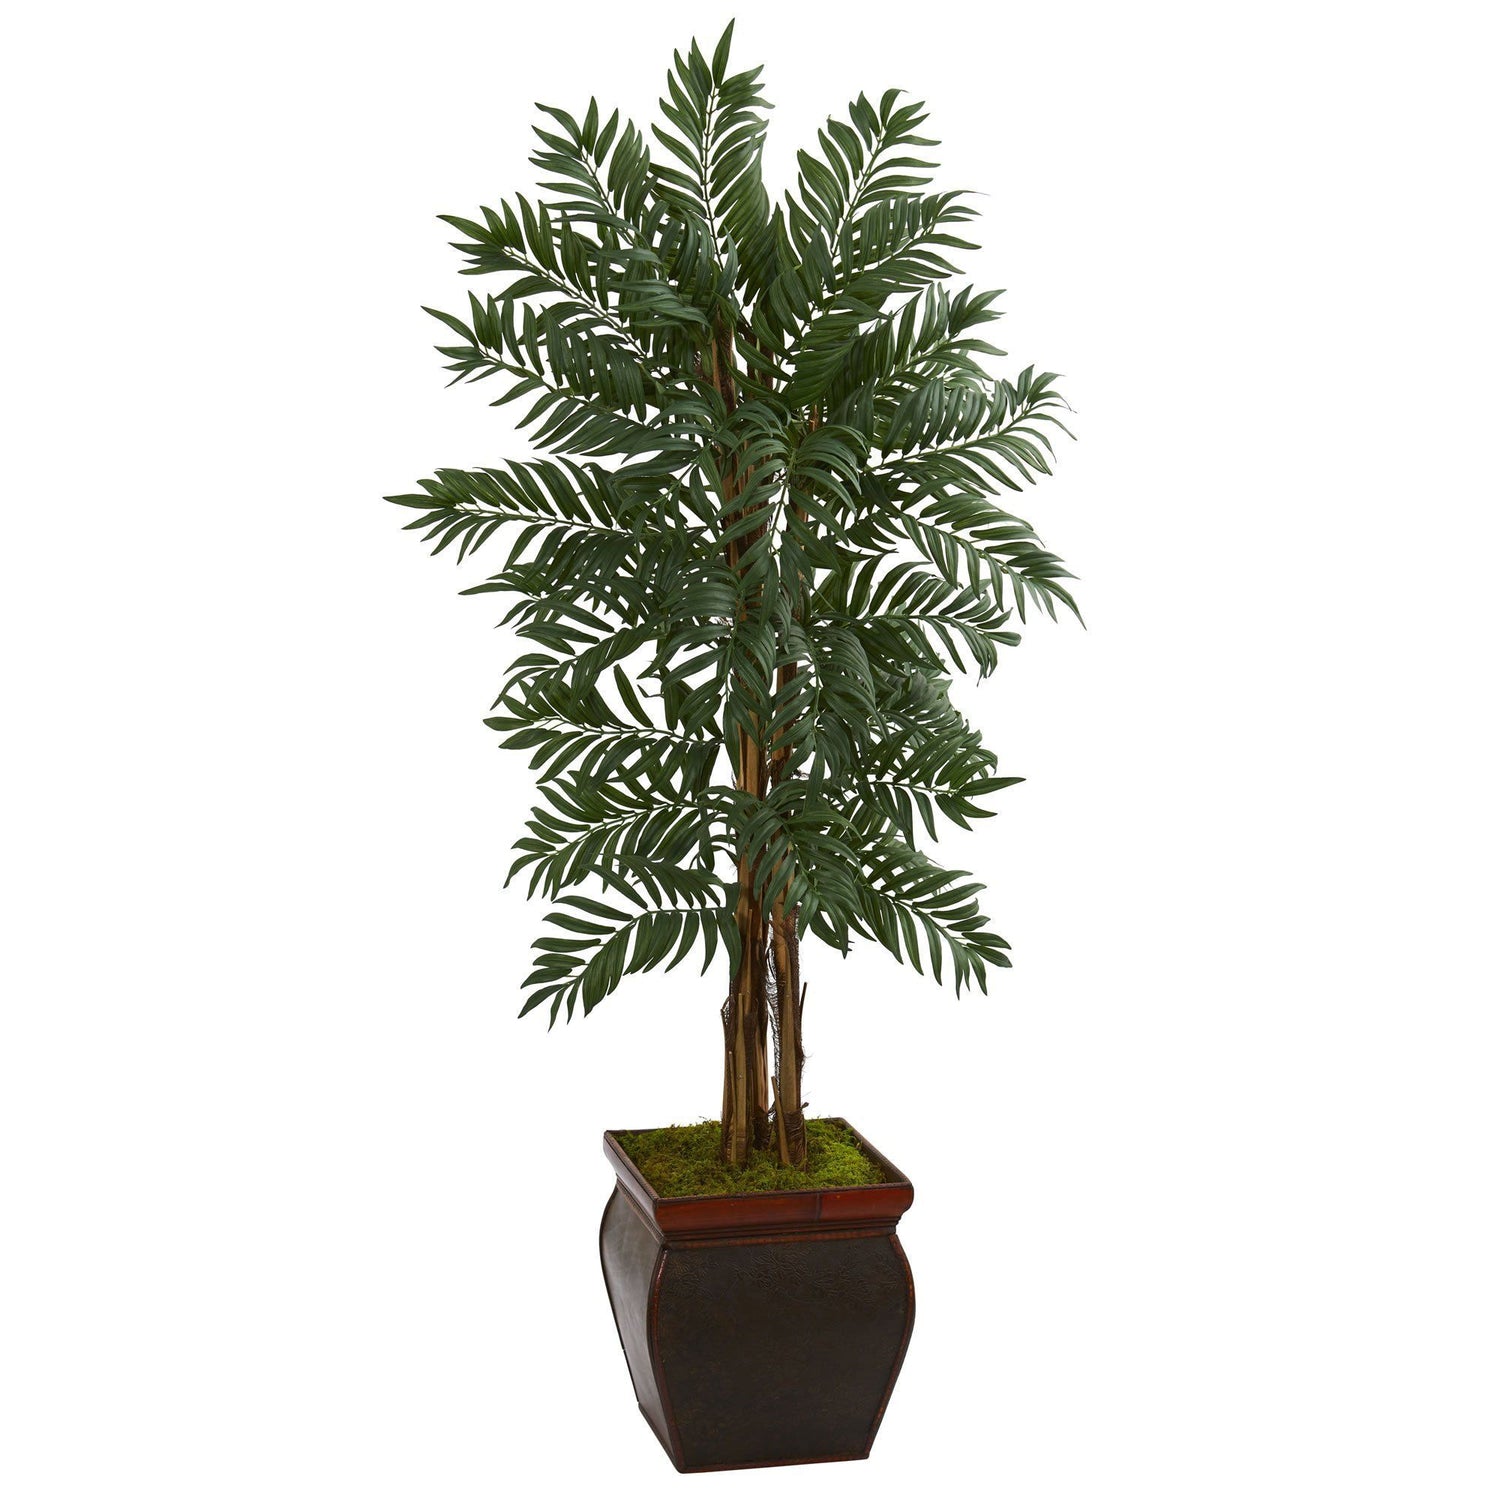 5’ Parlor Palm Artificial Tree in Decorative Planter